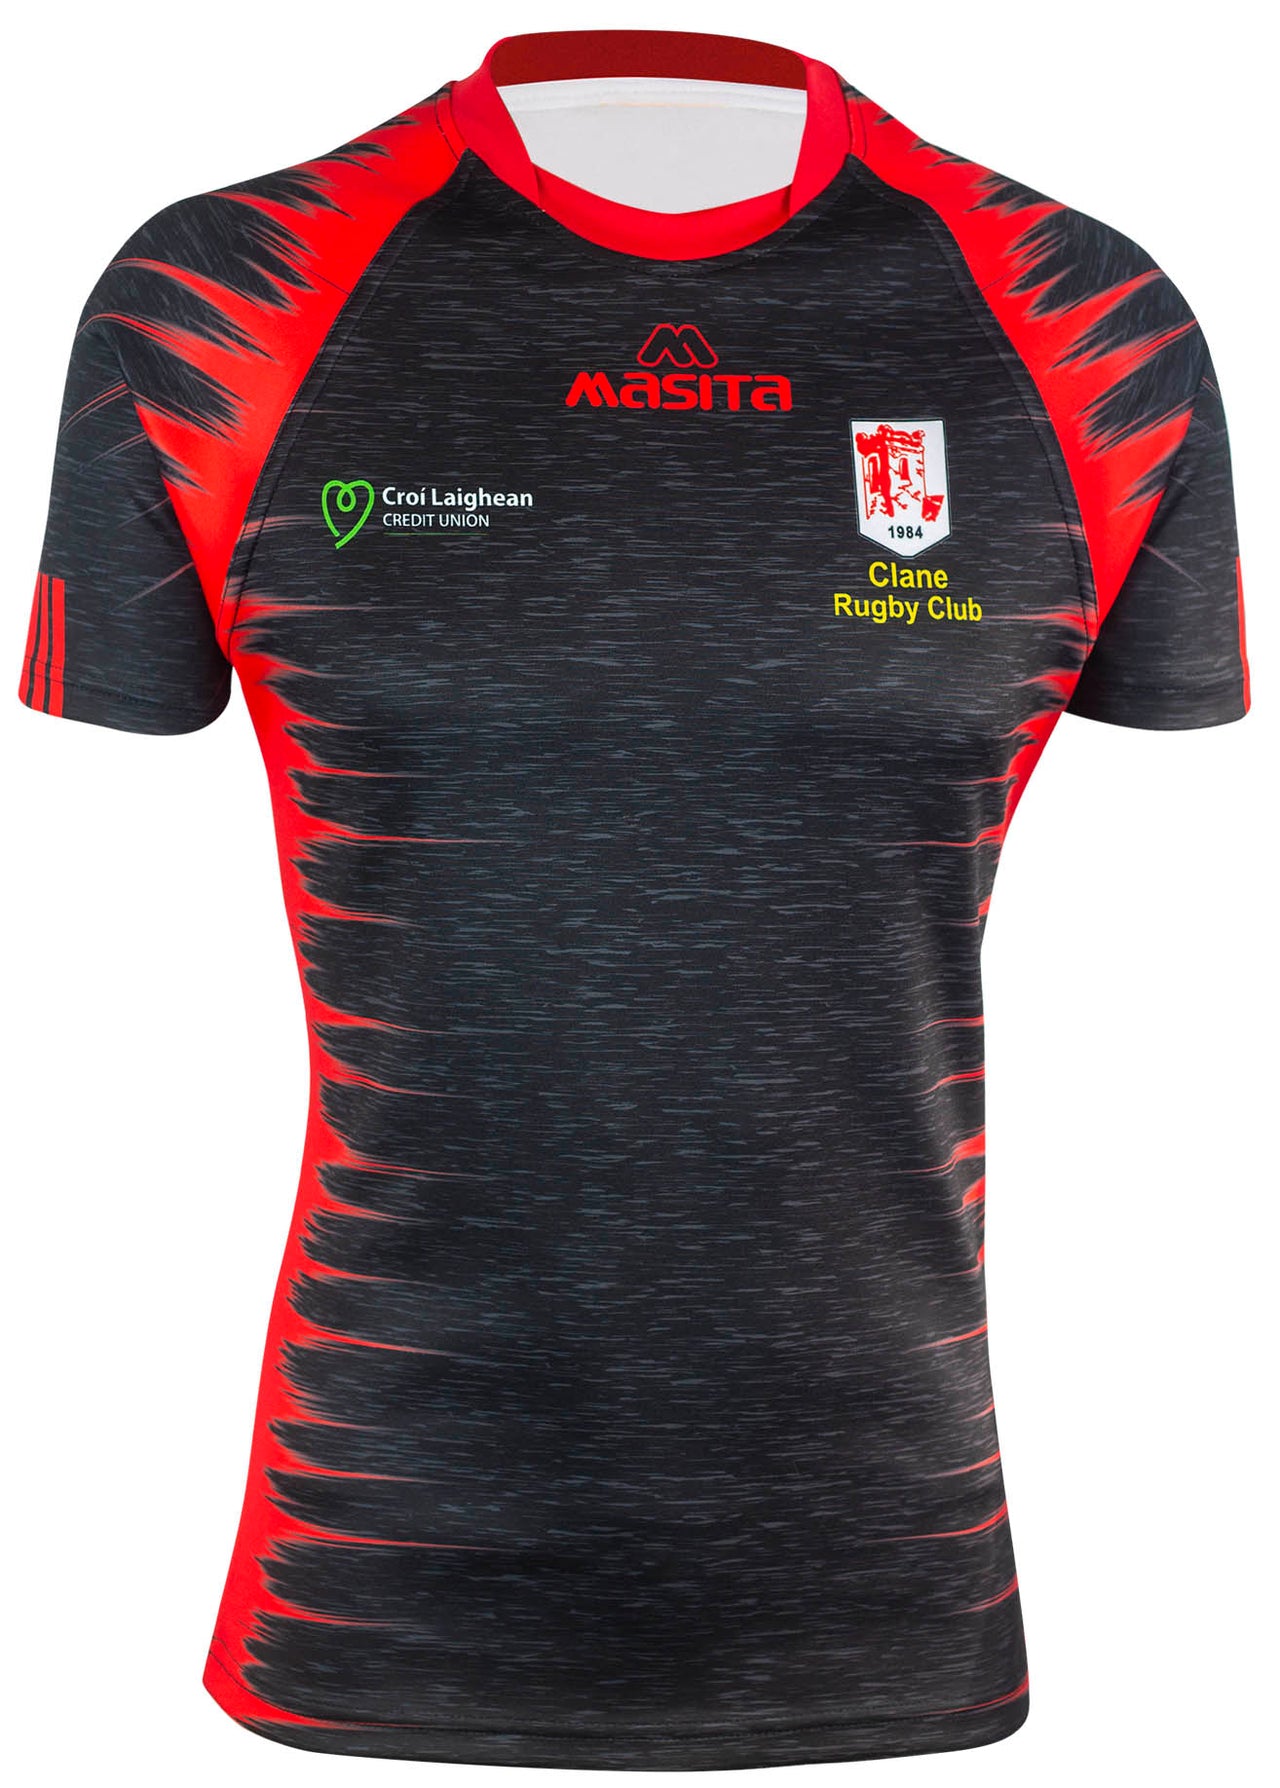 Clane Rugby Training Jersey Player Fit Adult